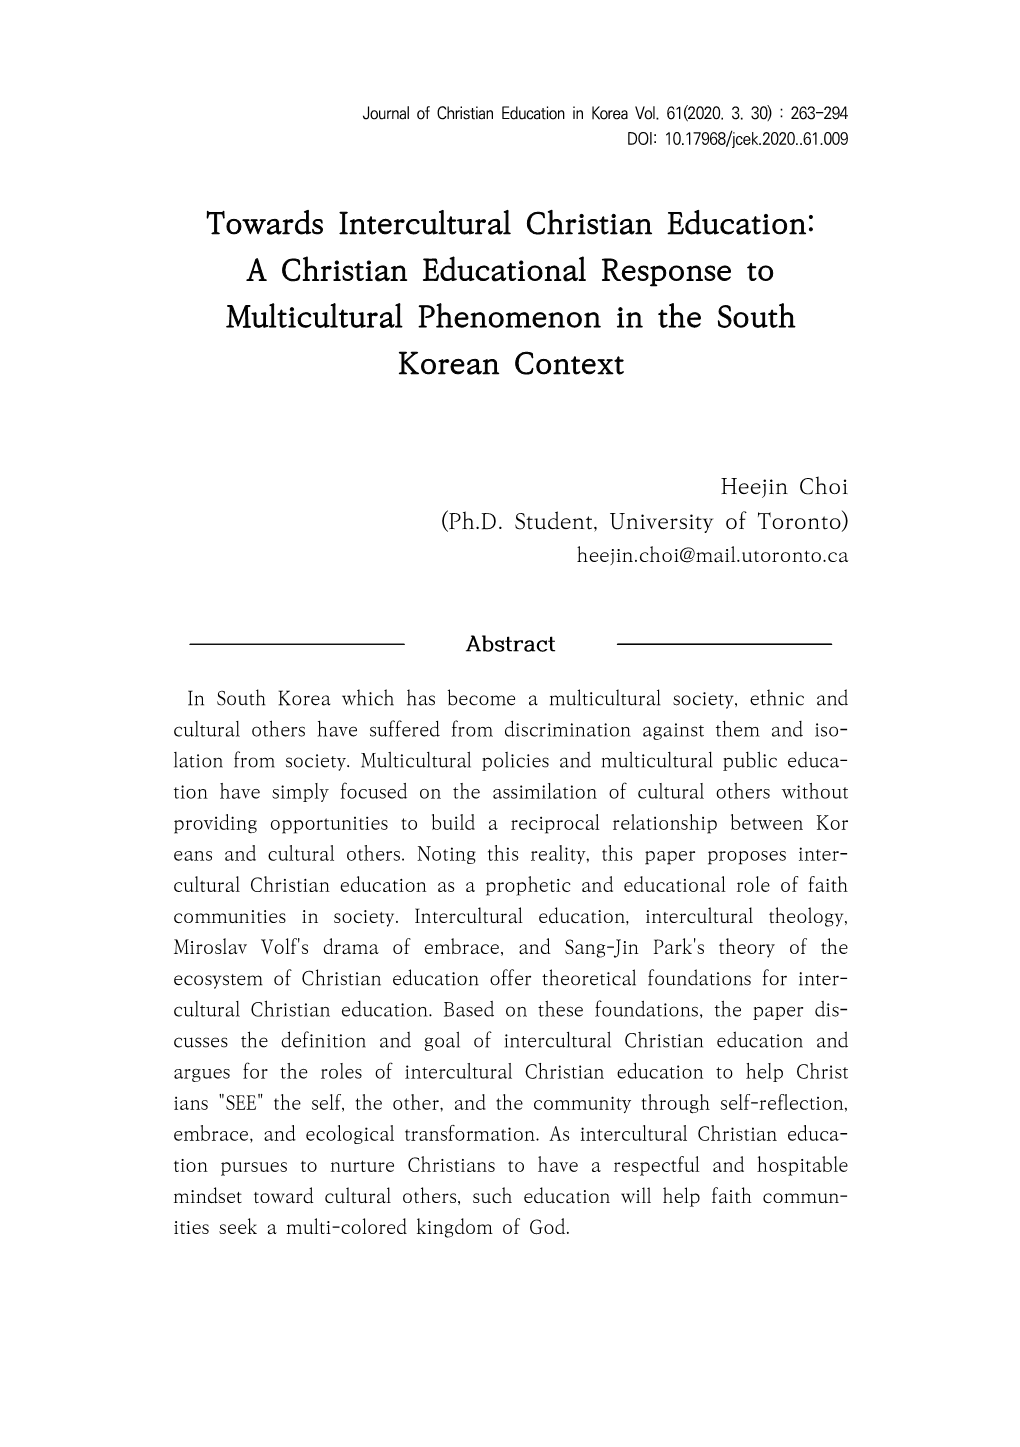 A Christian Educational Response to Multicultural Phenomenon in the South Korean Context